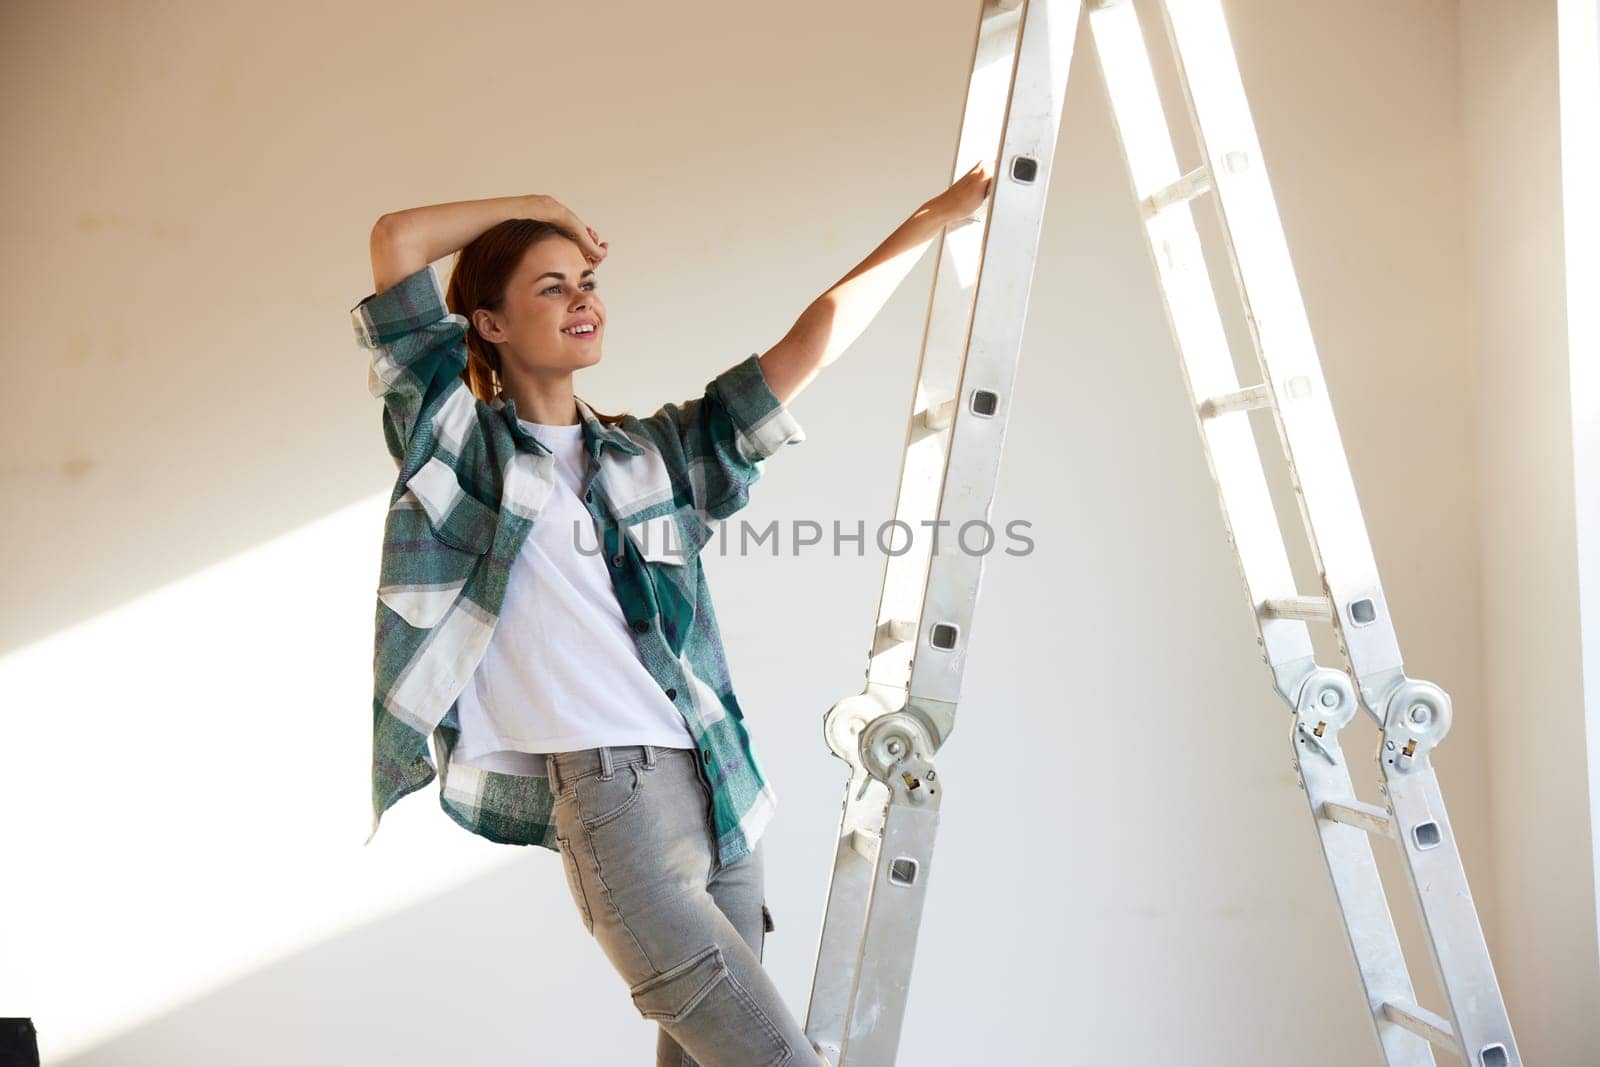 a laughing woman stands on a construction ladder and joyfully raises her hand as a sign of the end of the repair. High quality photo